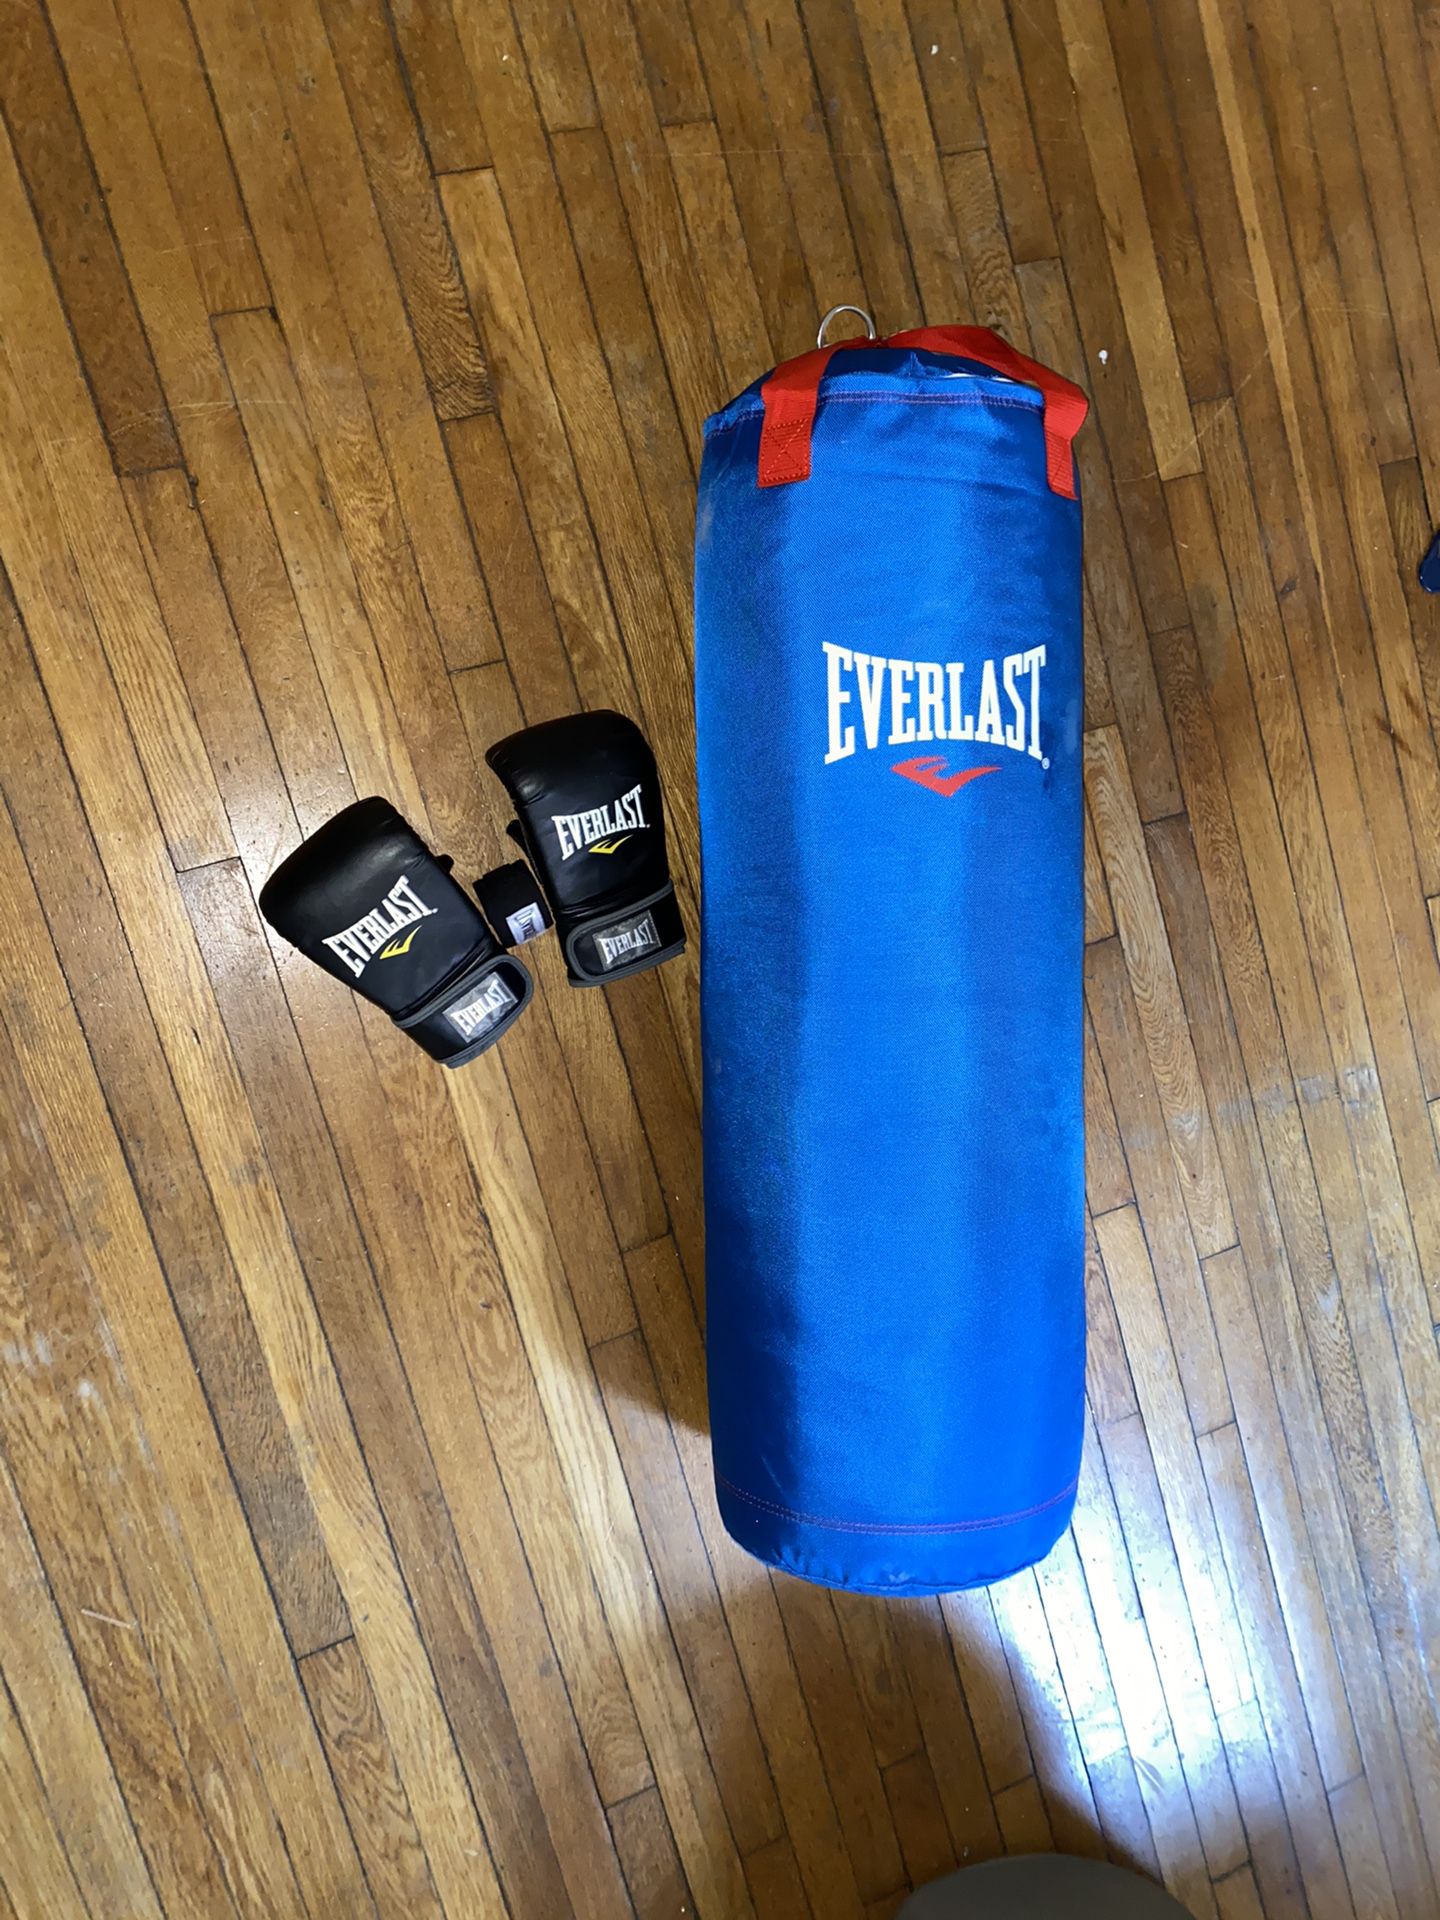 Professional Everlast boxing set comes with gloves and wraps